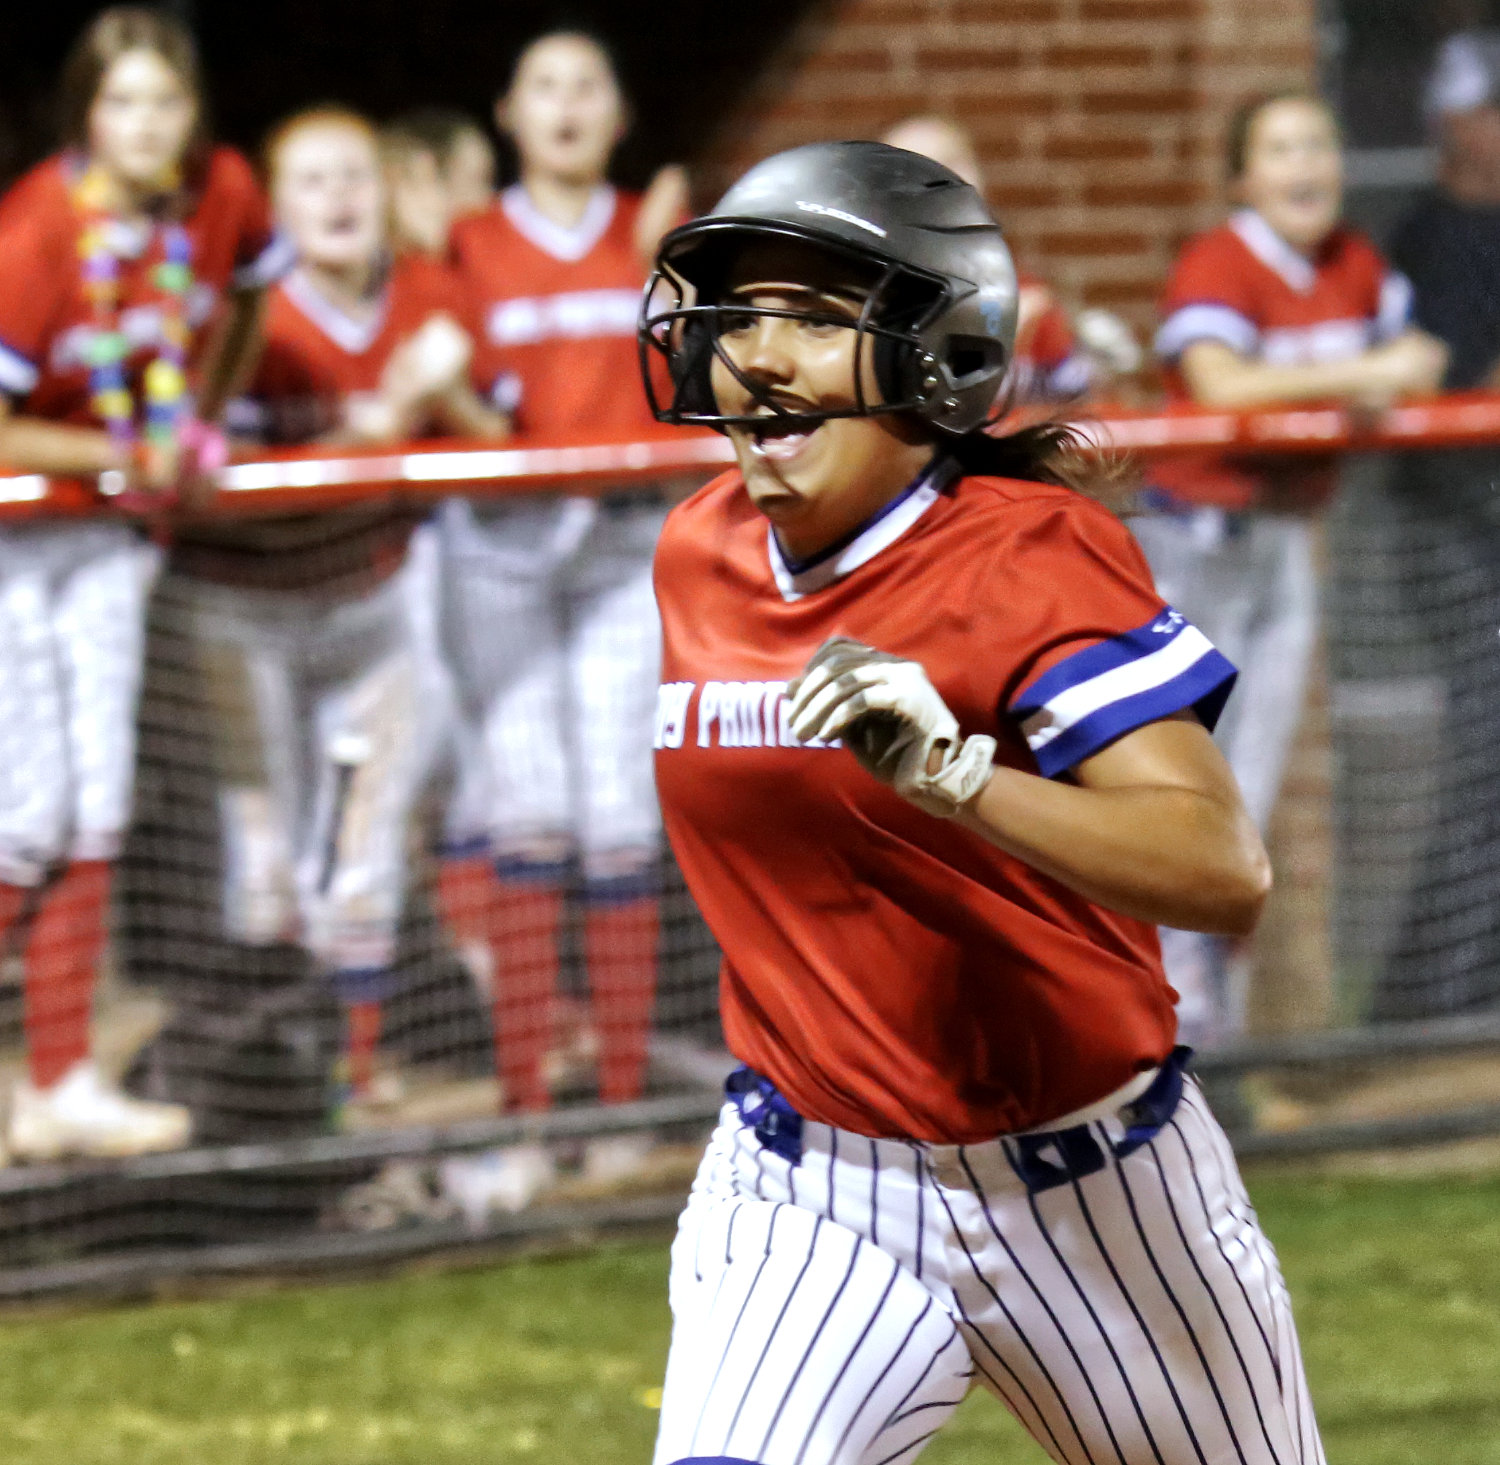 Lady Panther Erin Langston scores by stealing home.